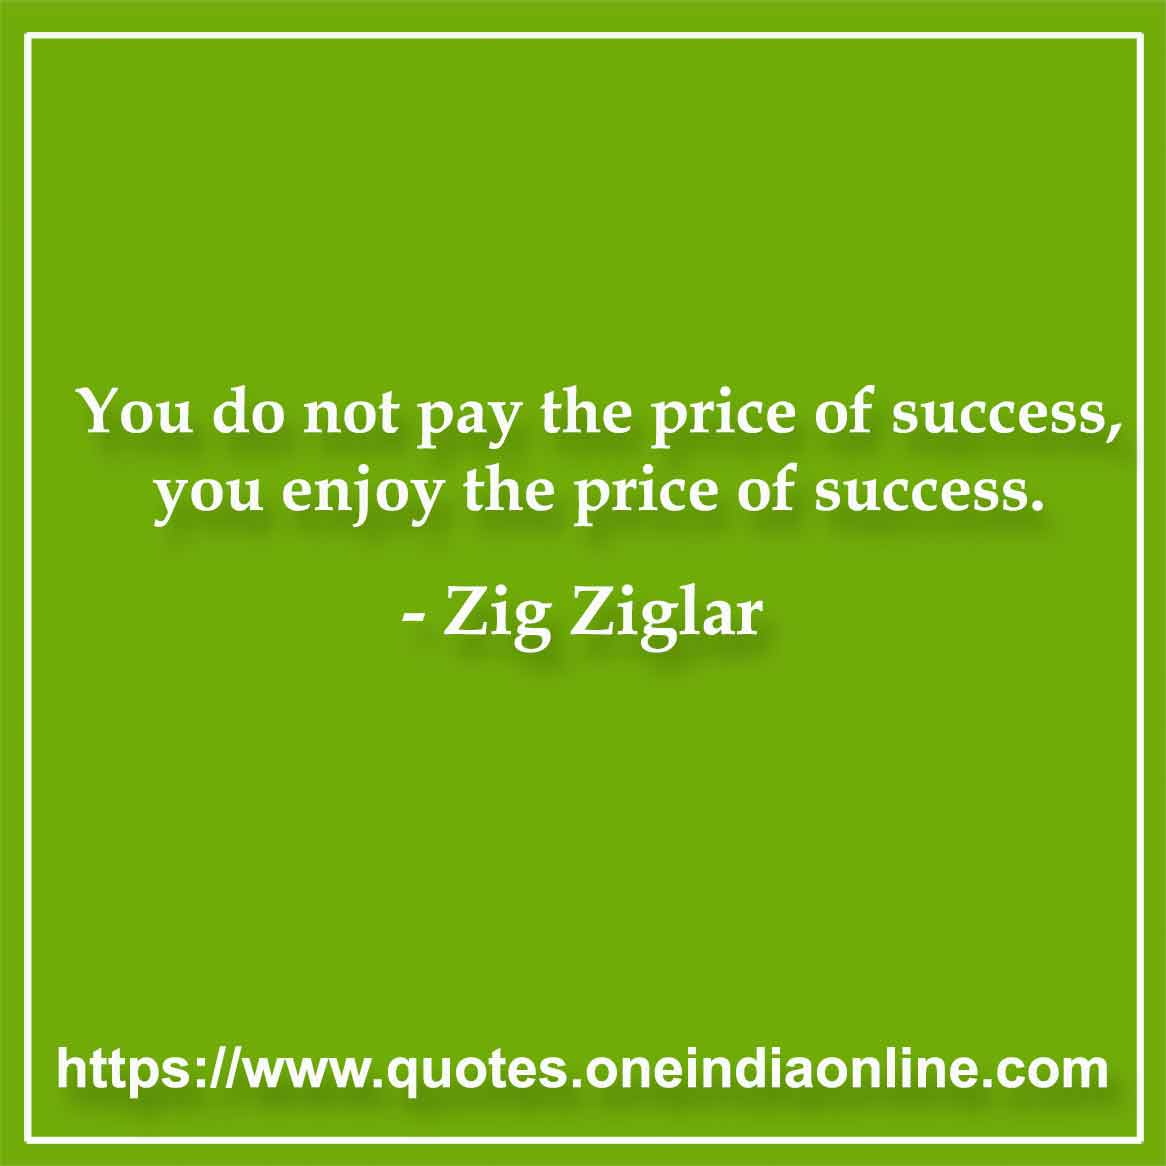 You do not pay the price of success, you enjoy the price of success.

-  Zig Ziglar